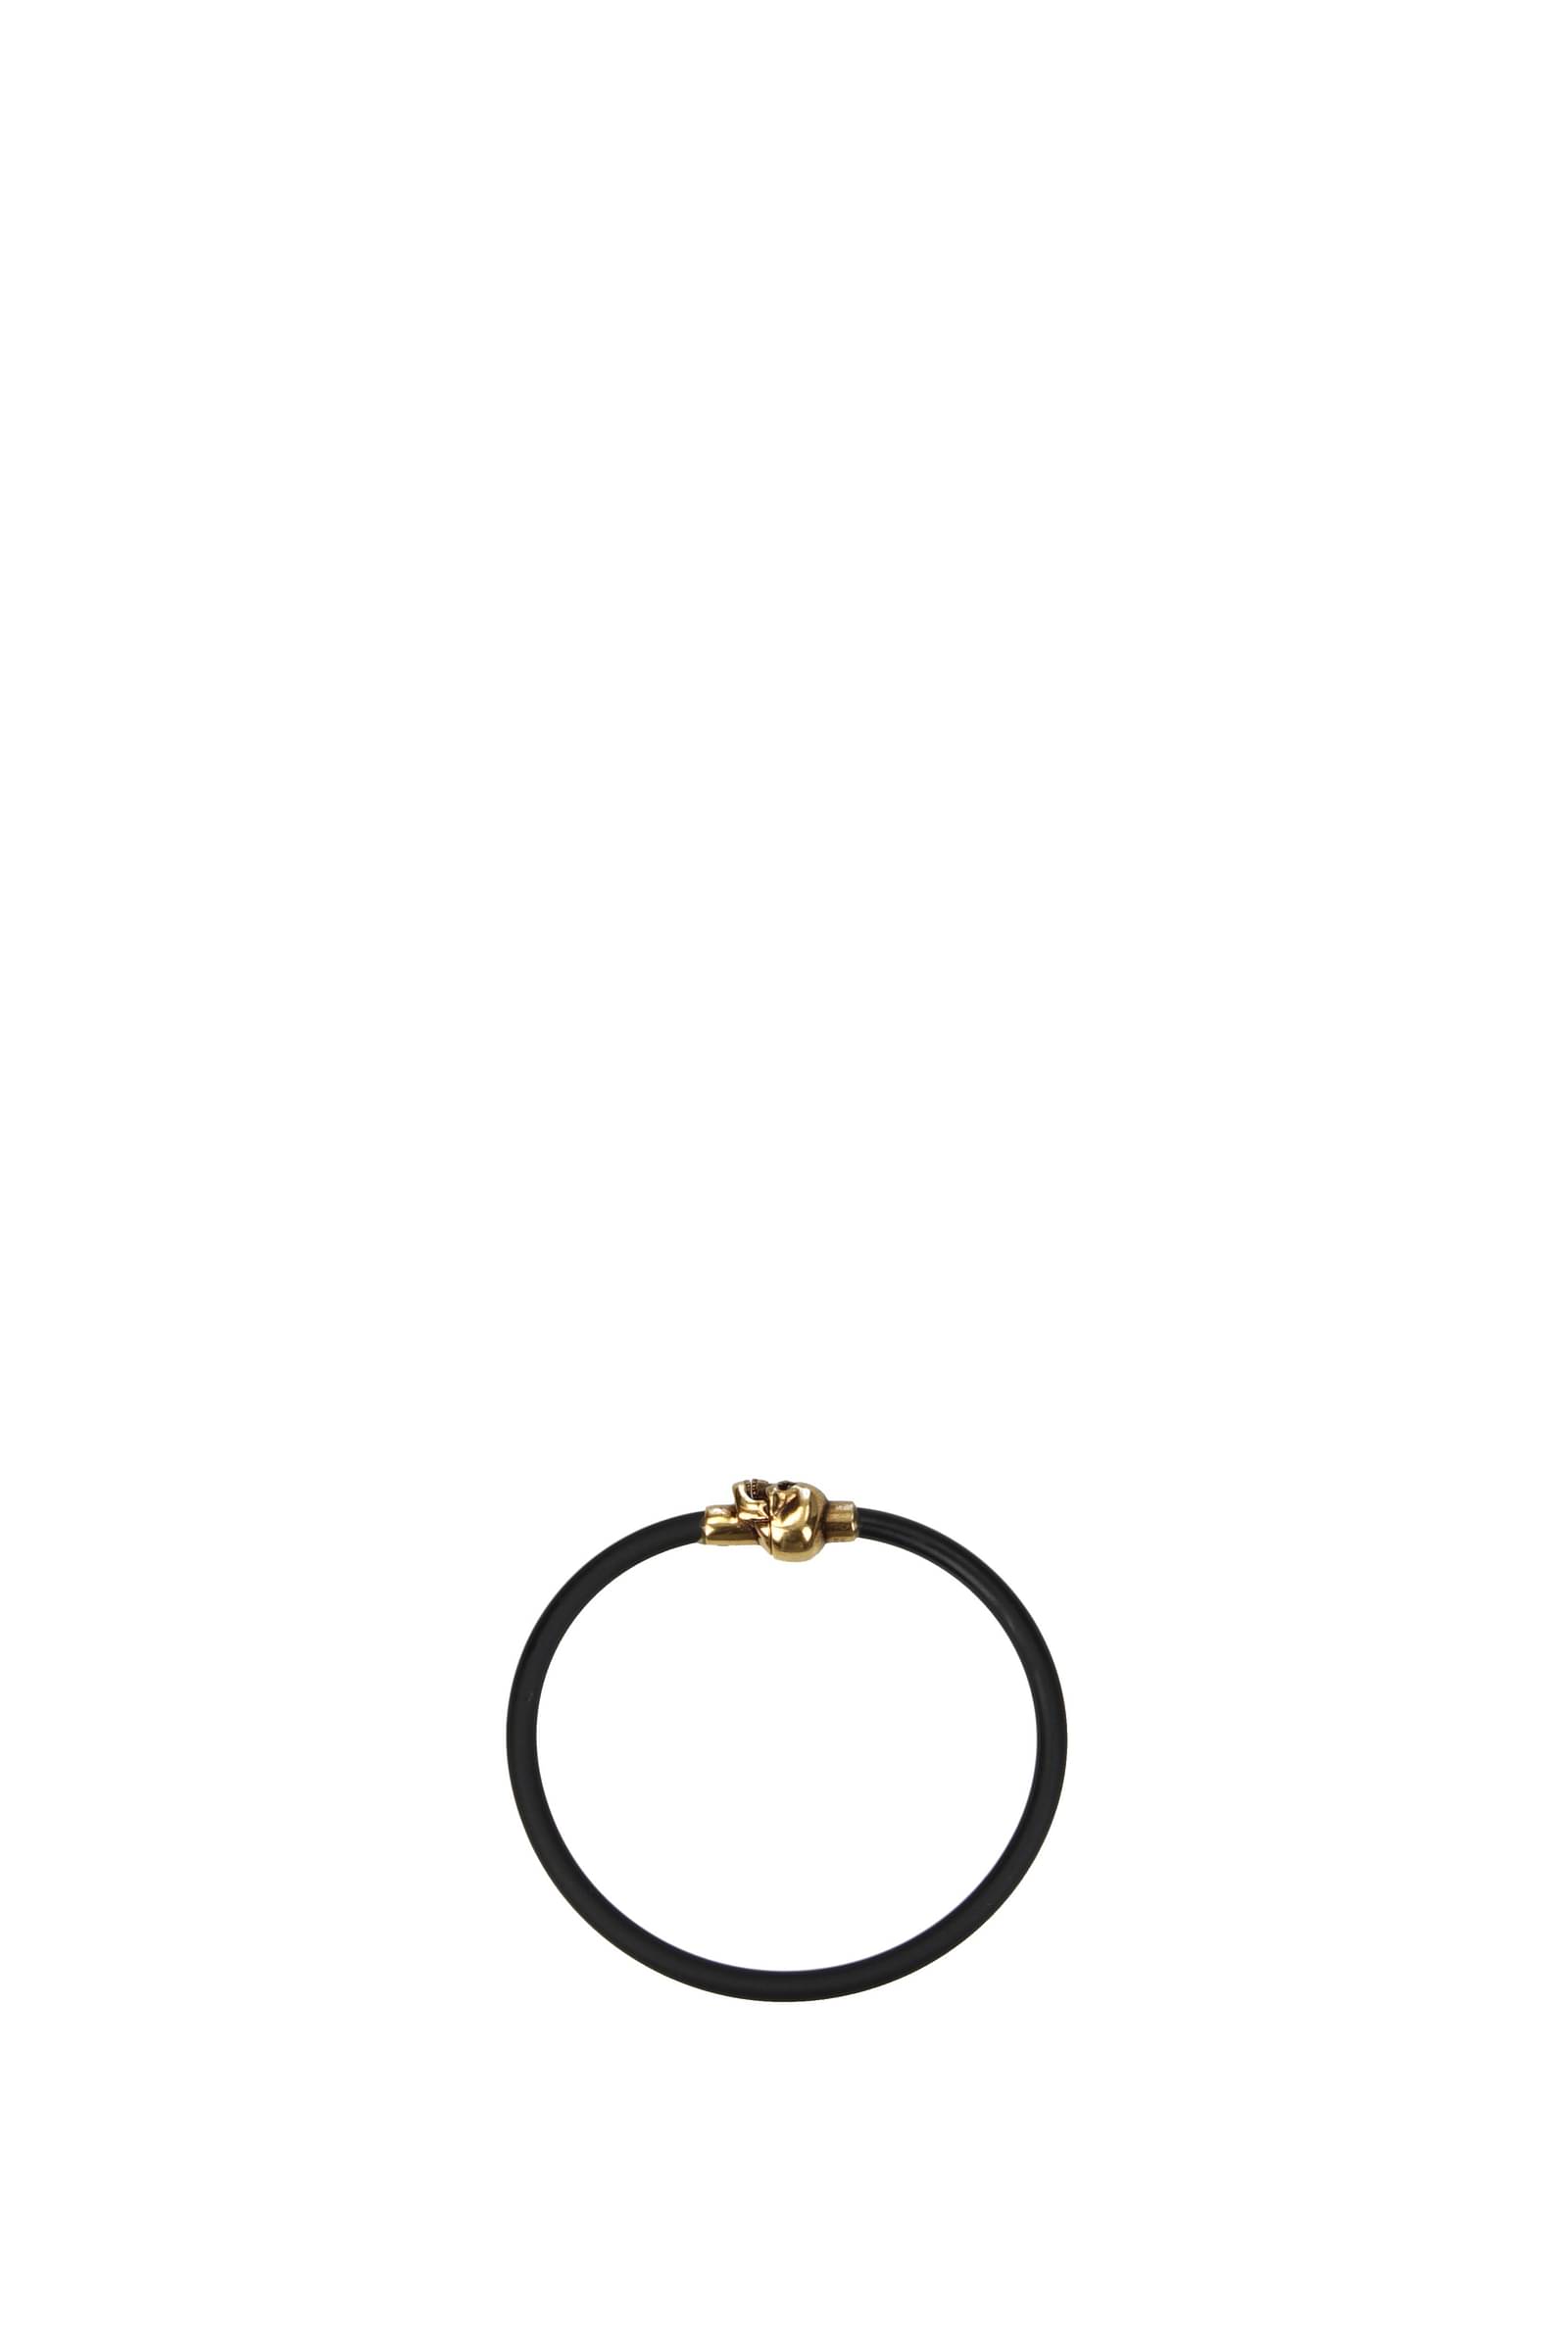 Bracelet made of rubber with prayer in gold and silver metallic plate |  Jewelry Eshop